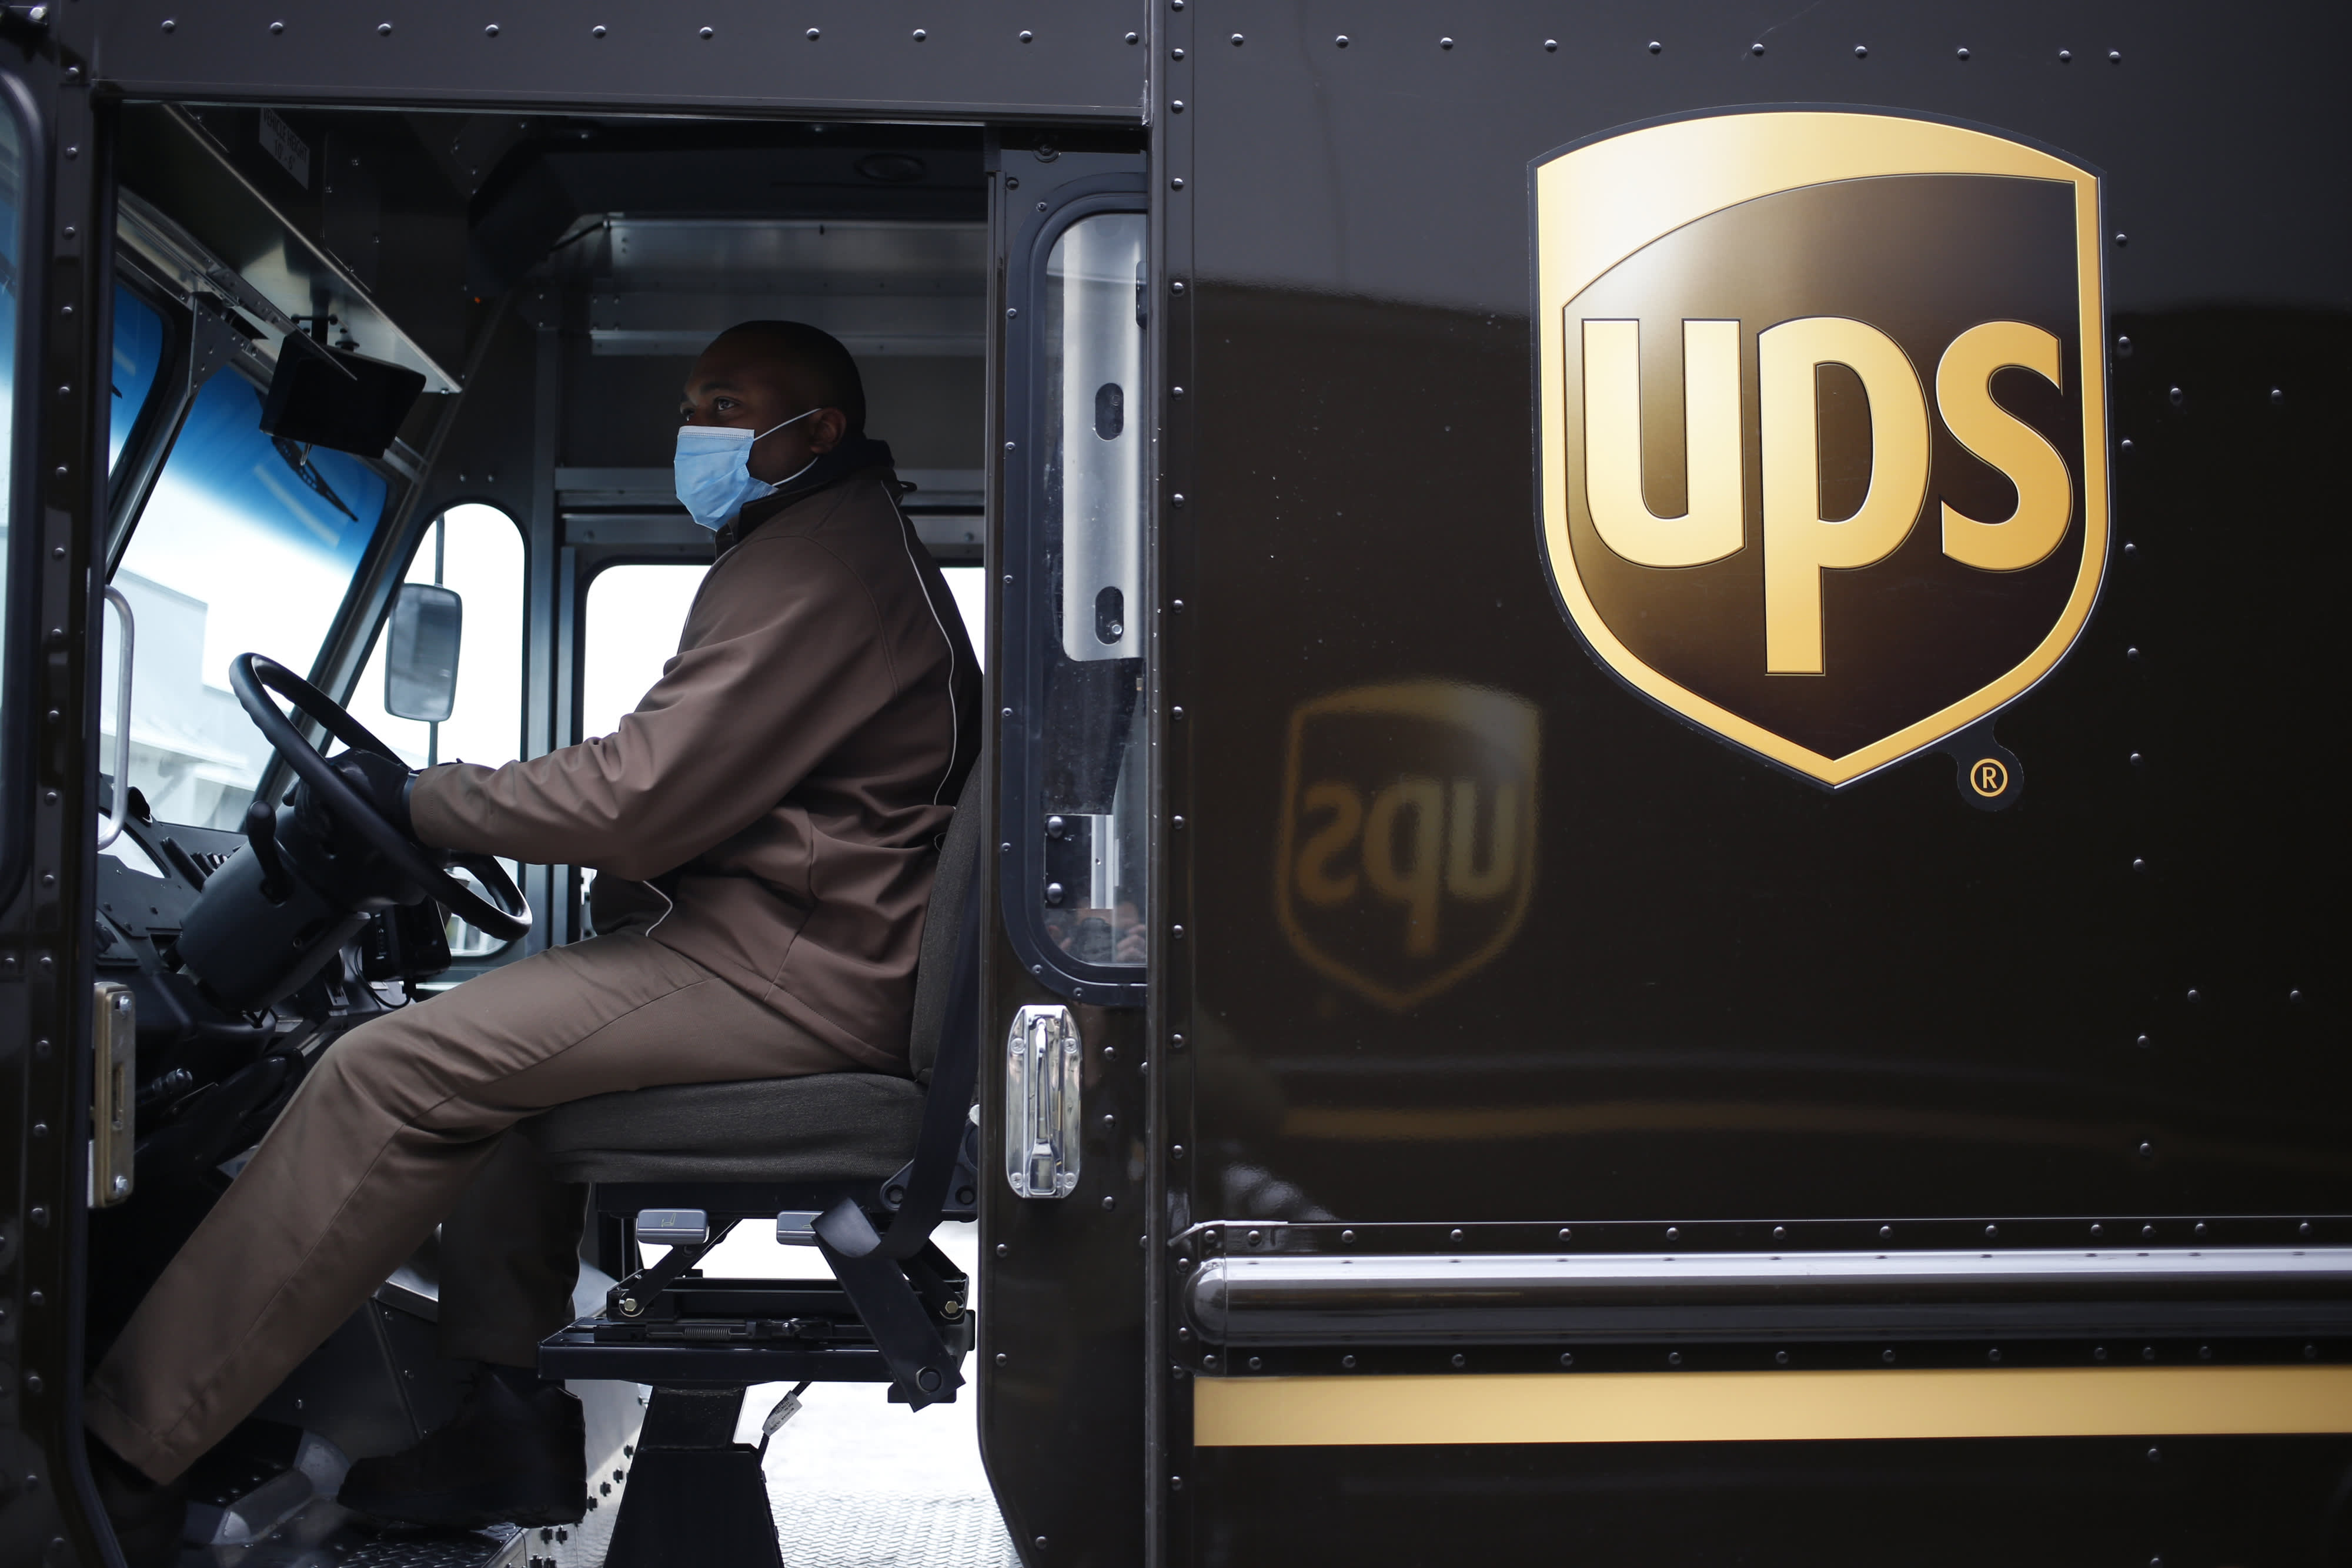 UPS CEO on holiday peak season: 'We've been planning for this for months' - CNBC